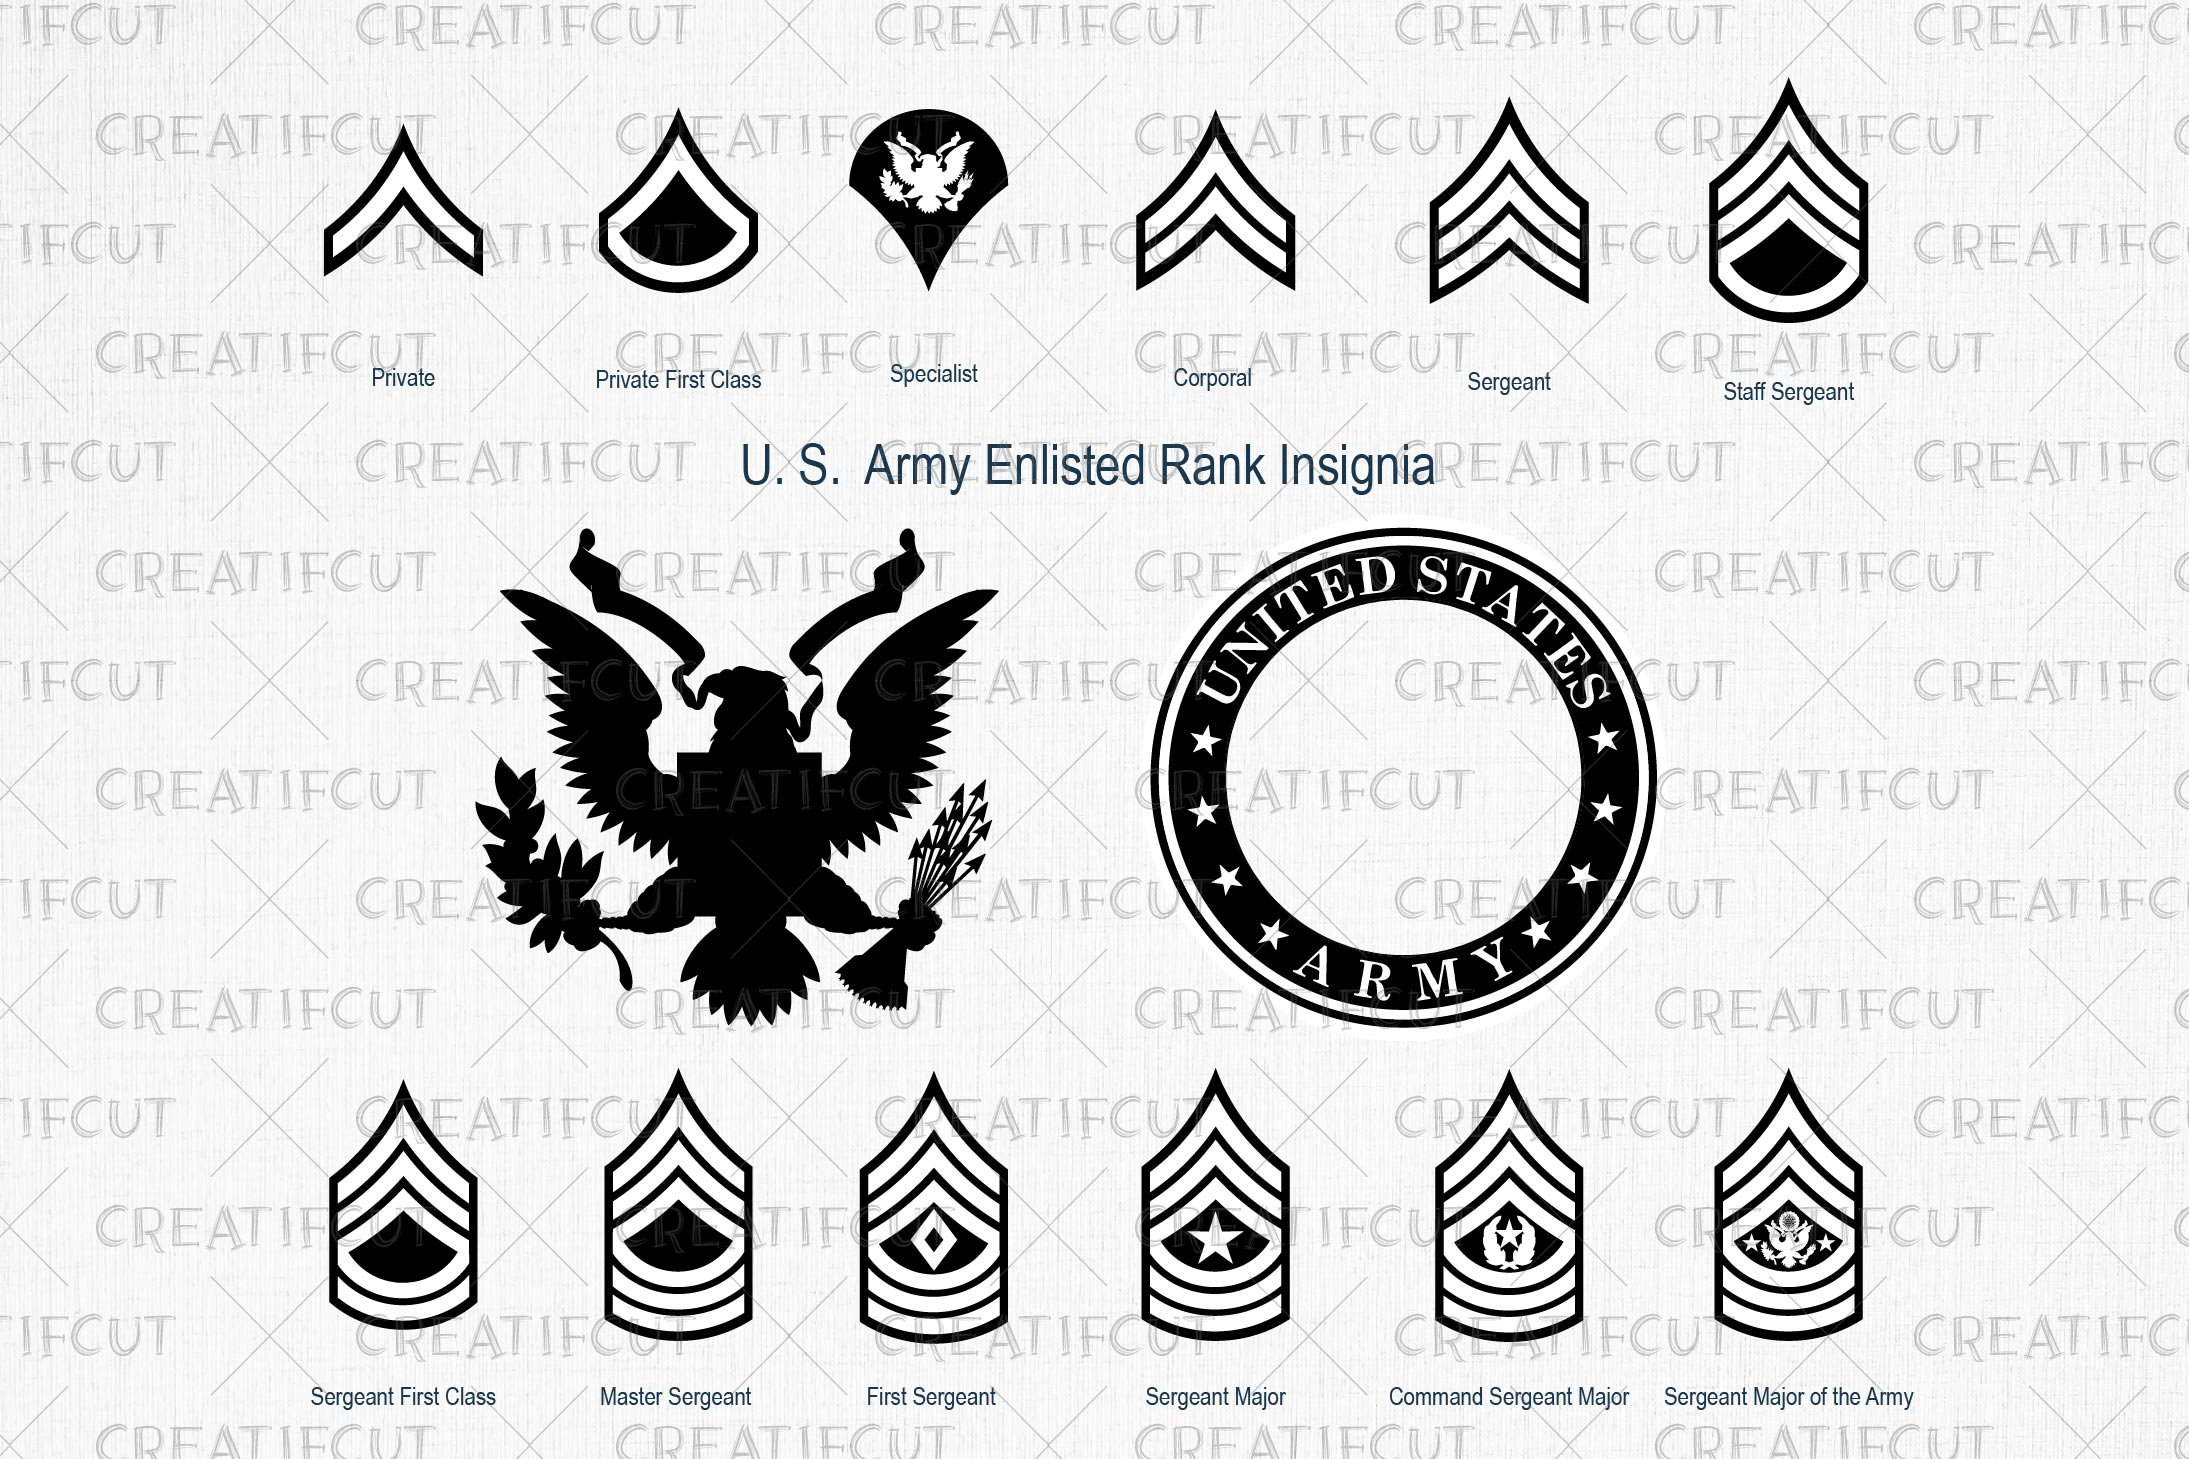 US Army Patches With Iron-on and Velcro Fasteners, Retired and Veteran  Patches, Embroidered US Army Patches for Jackets, T-shirts, Masks 